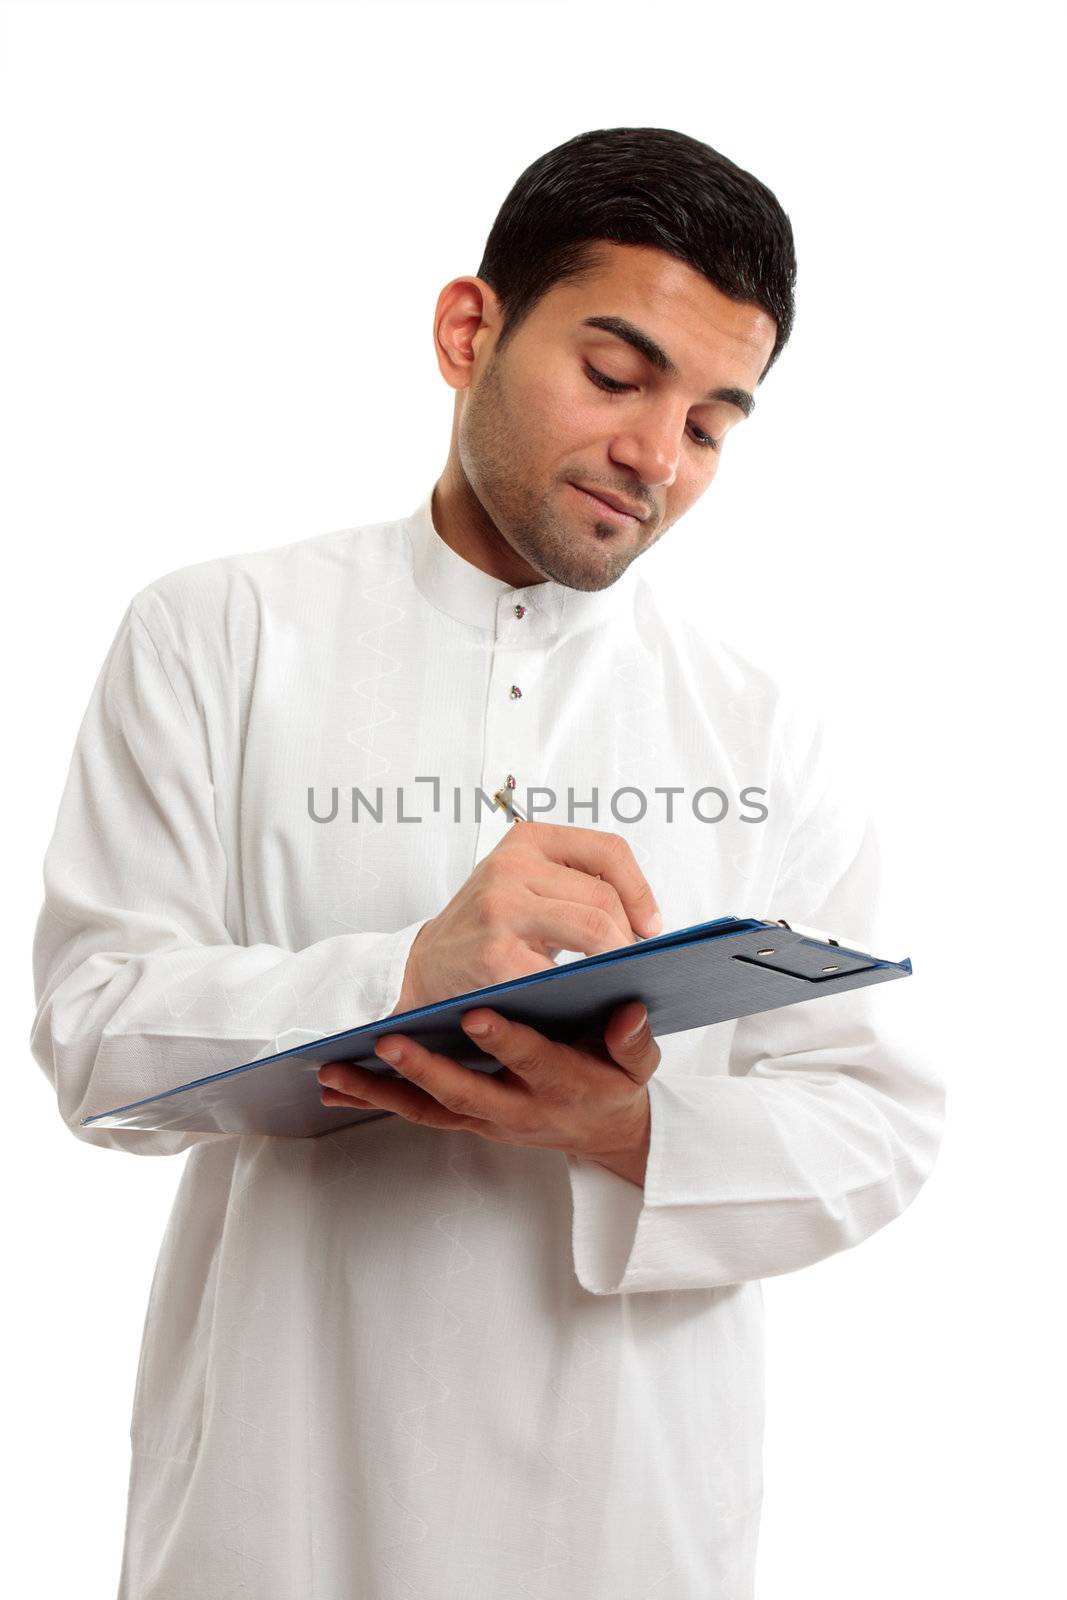 An ethnic businessman in traditional clothing, holding a clipboard folder and writing with a pen.  White background.